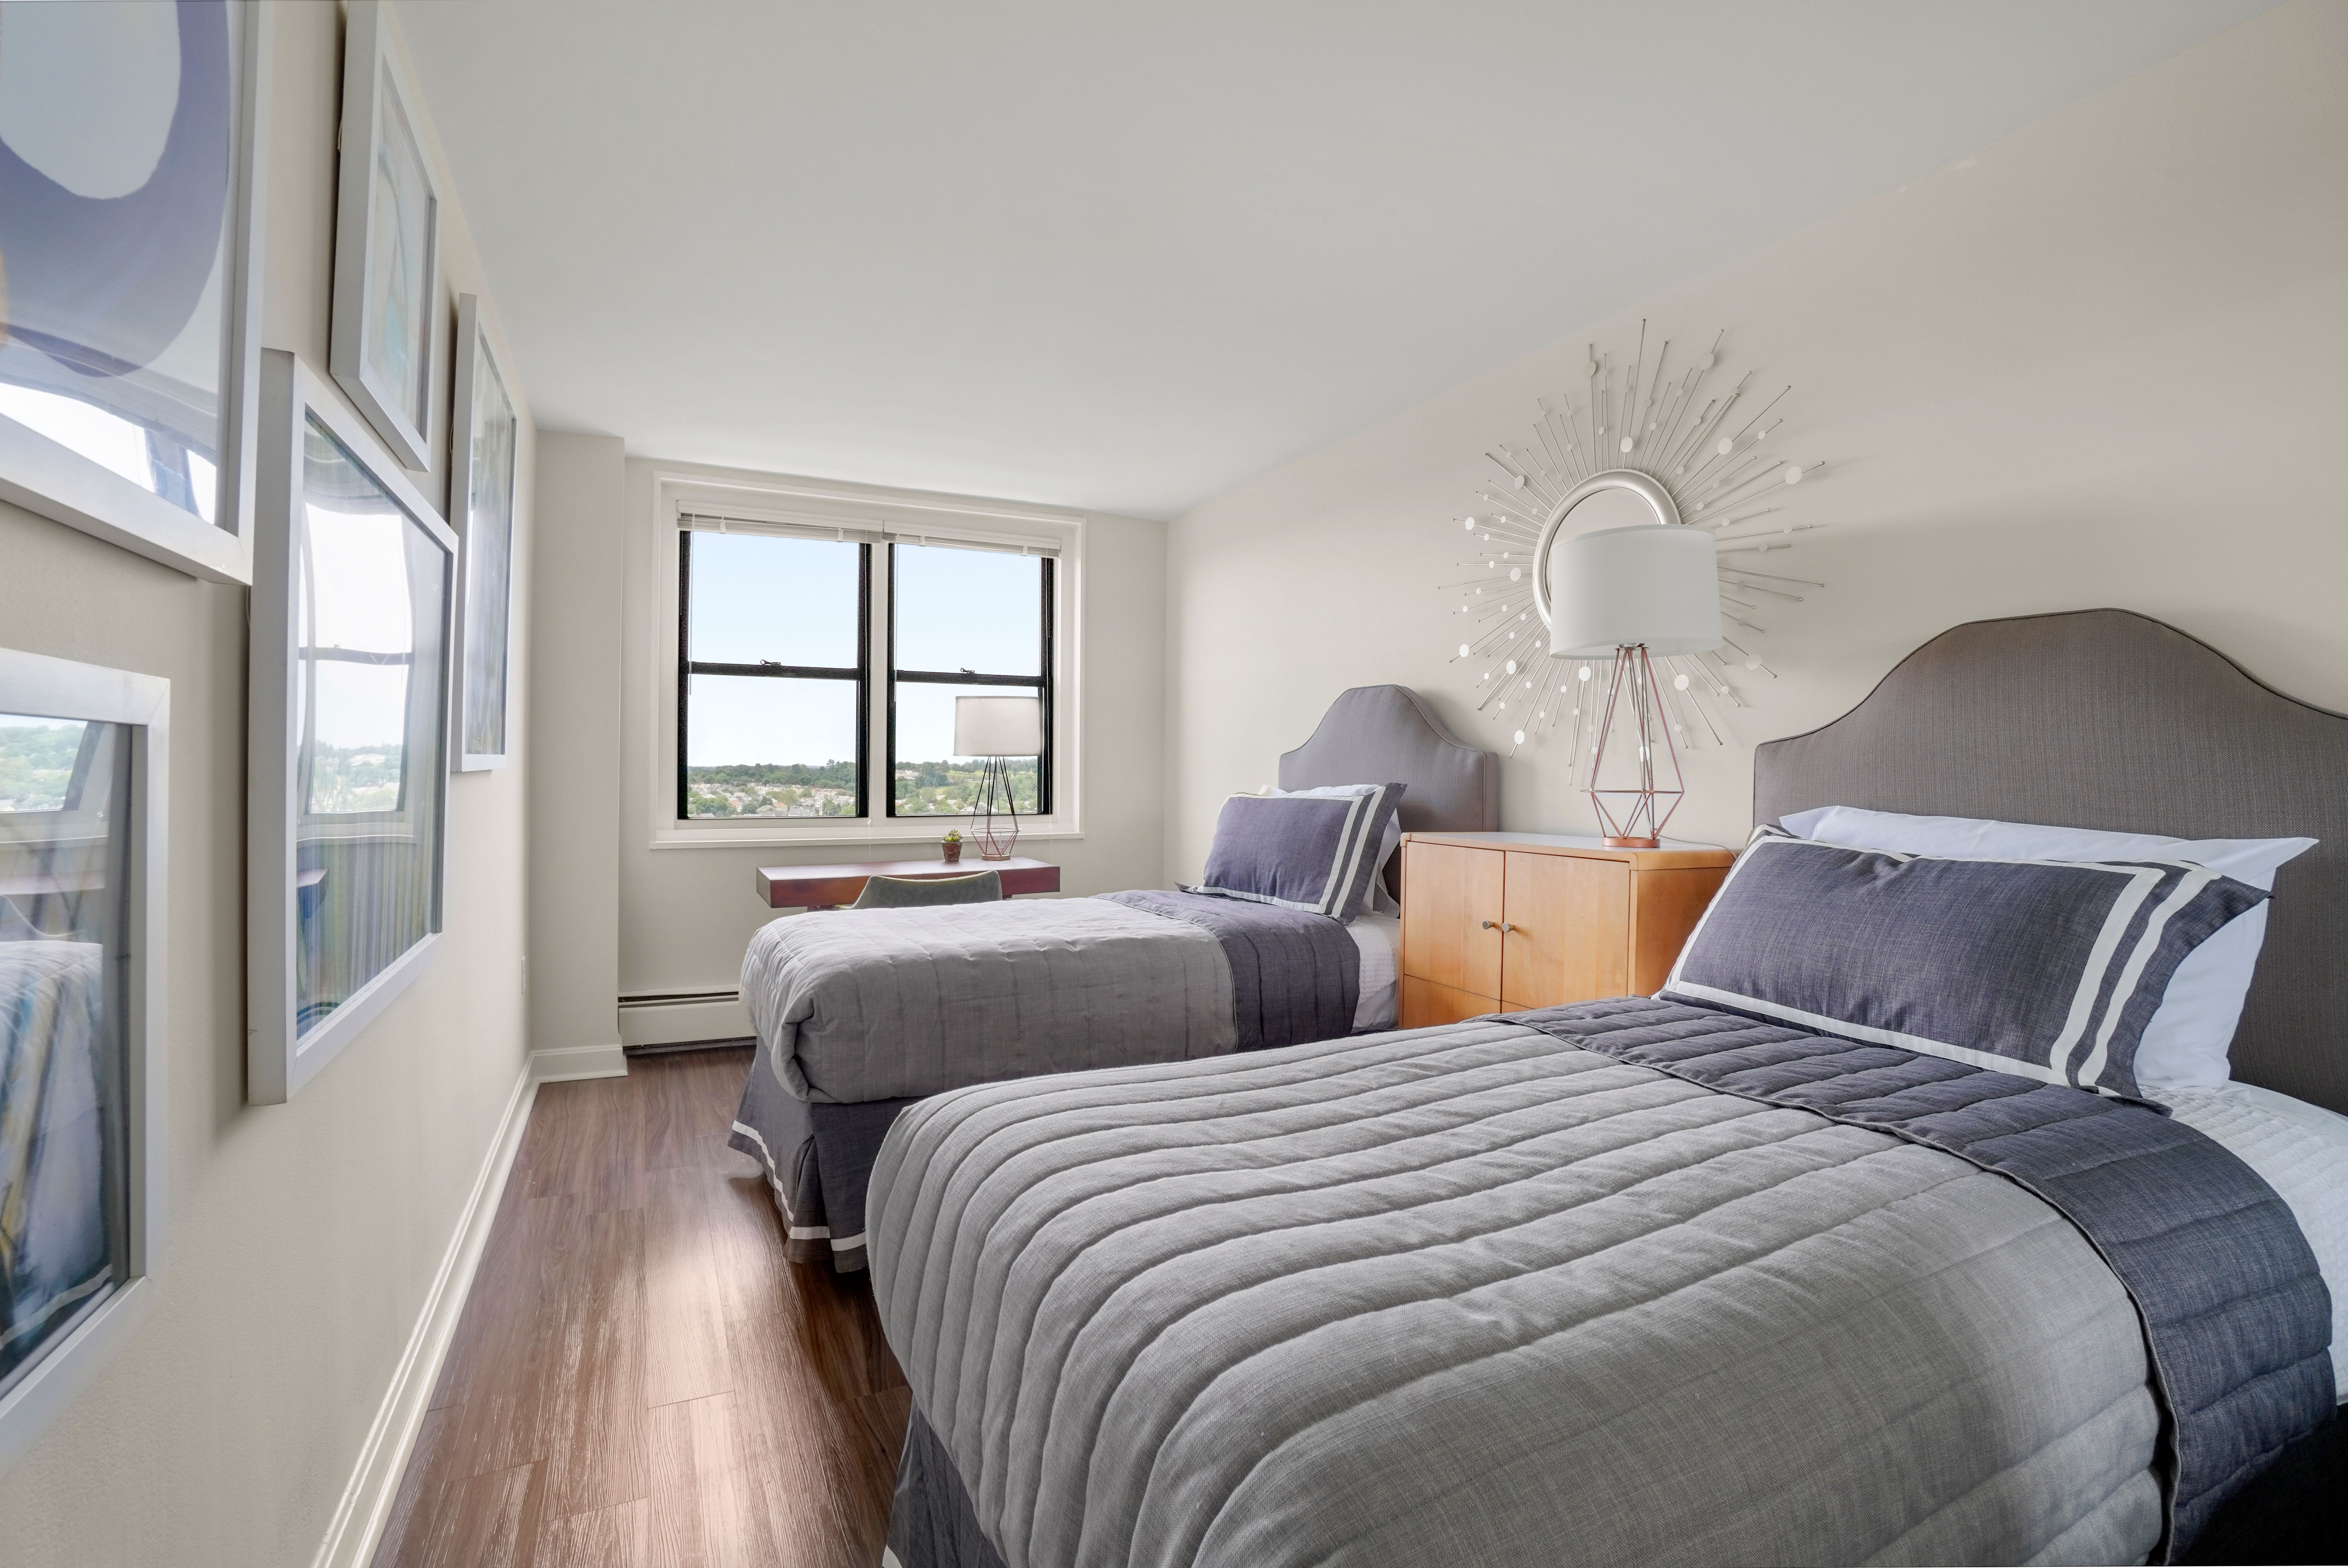 Parkside Place offers a Spacious bedroom in Cambridge, Massachusetts